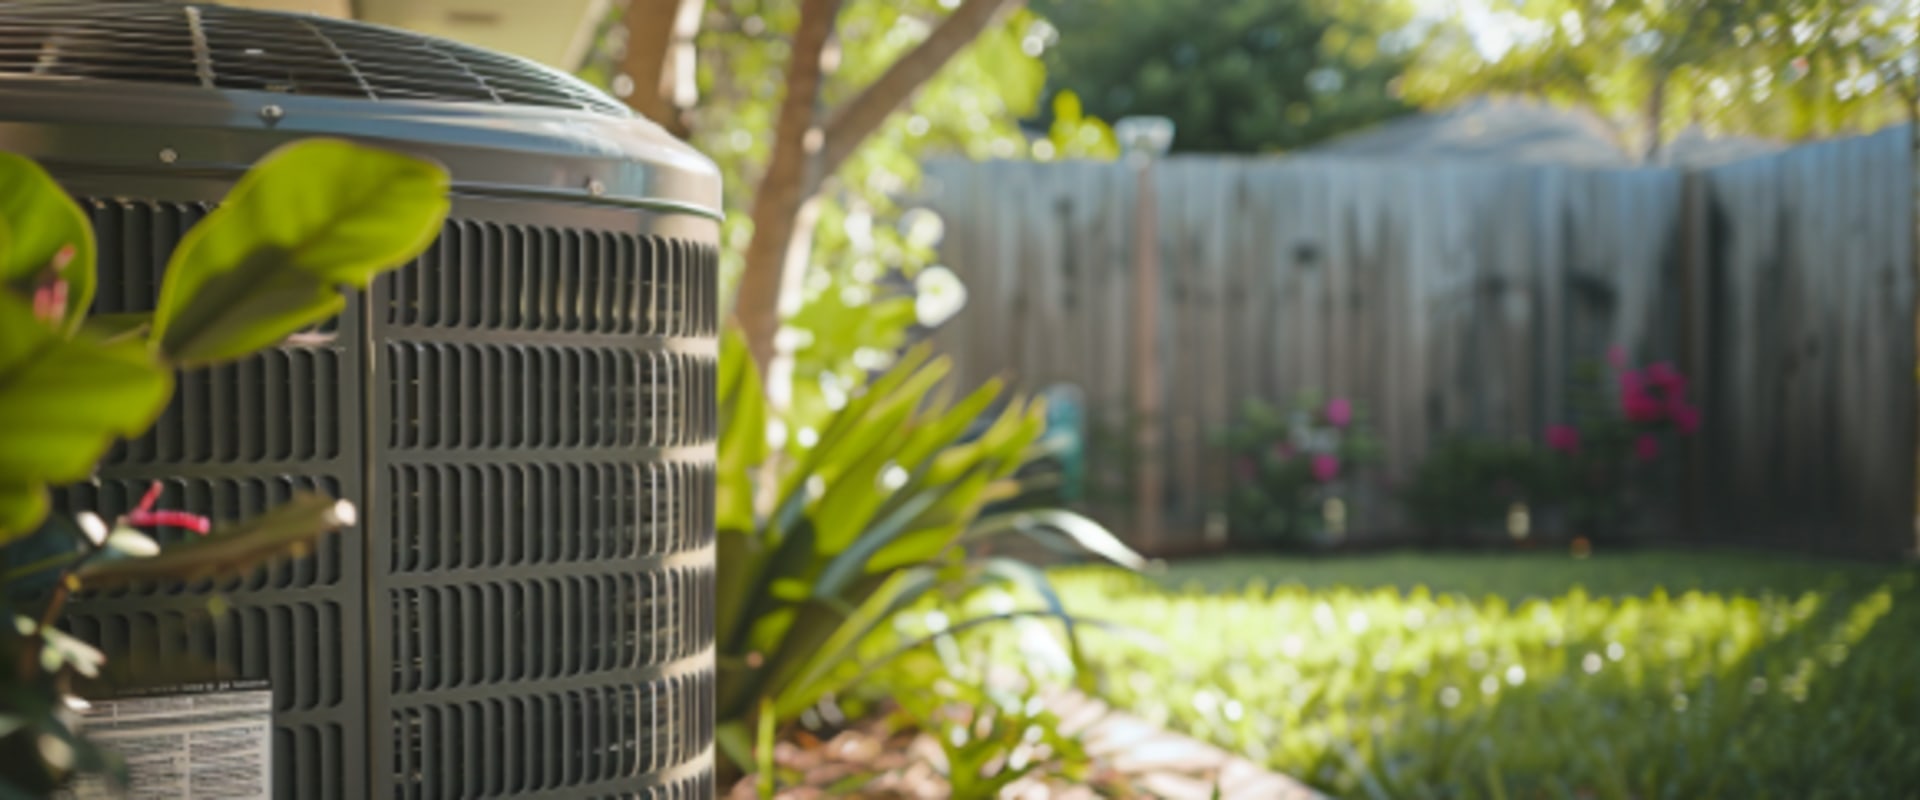 How Does Running an AC Without a Filter Affect Its Performance?